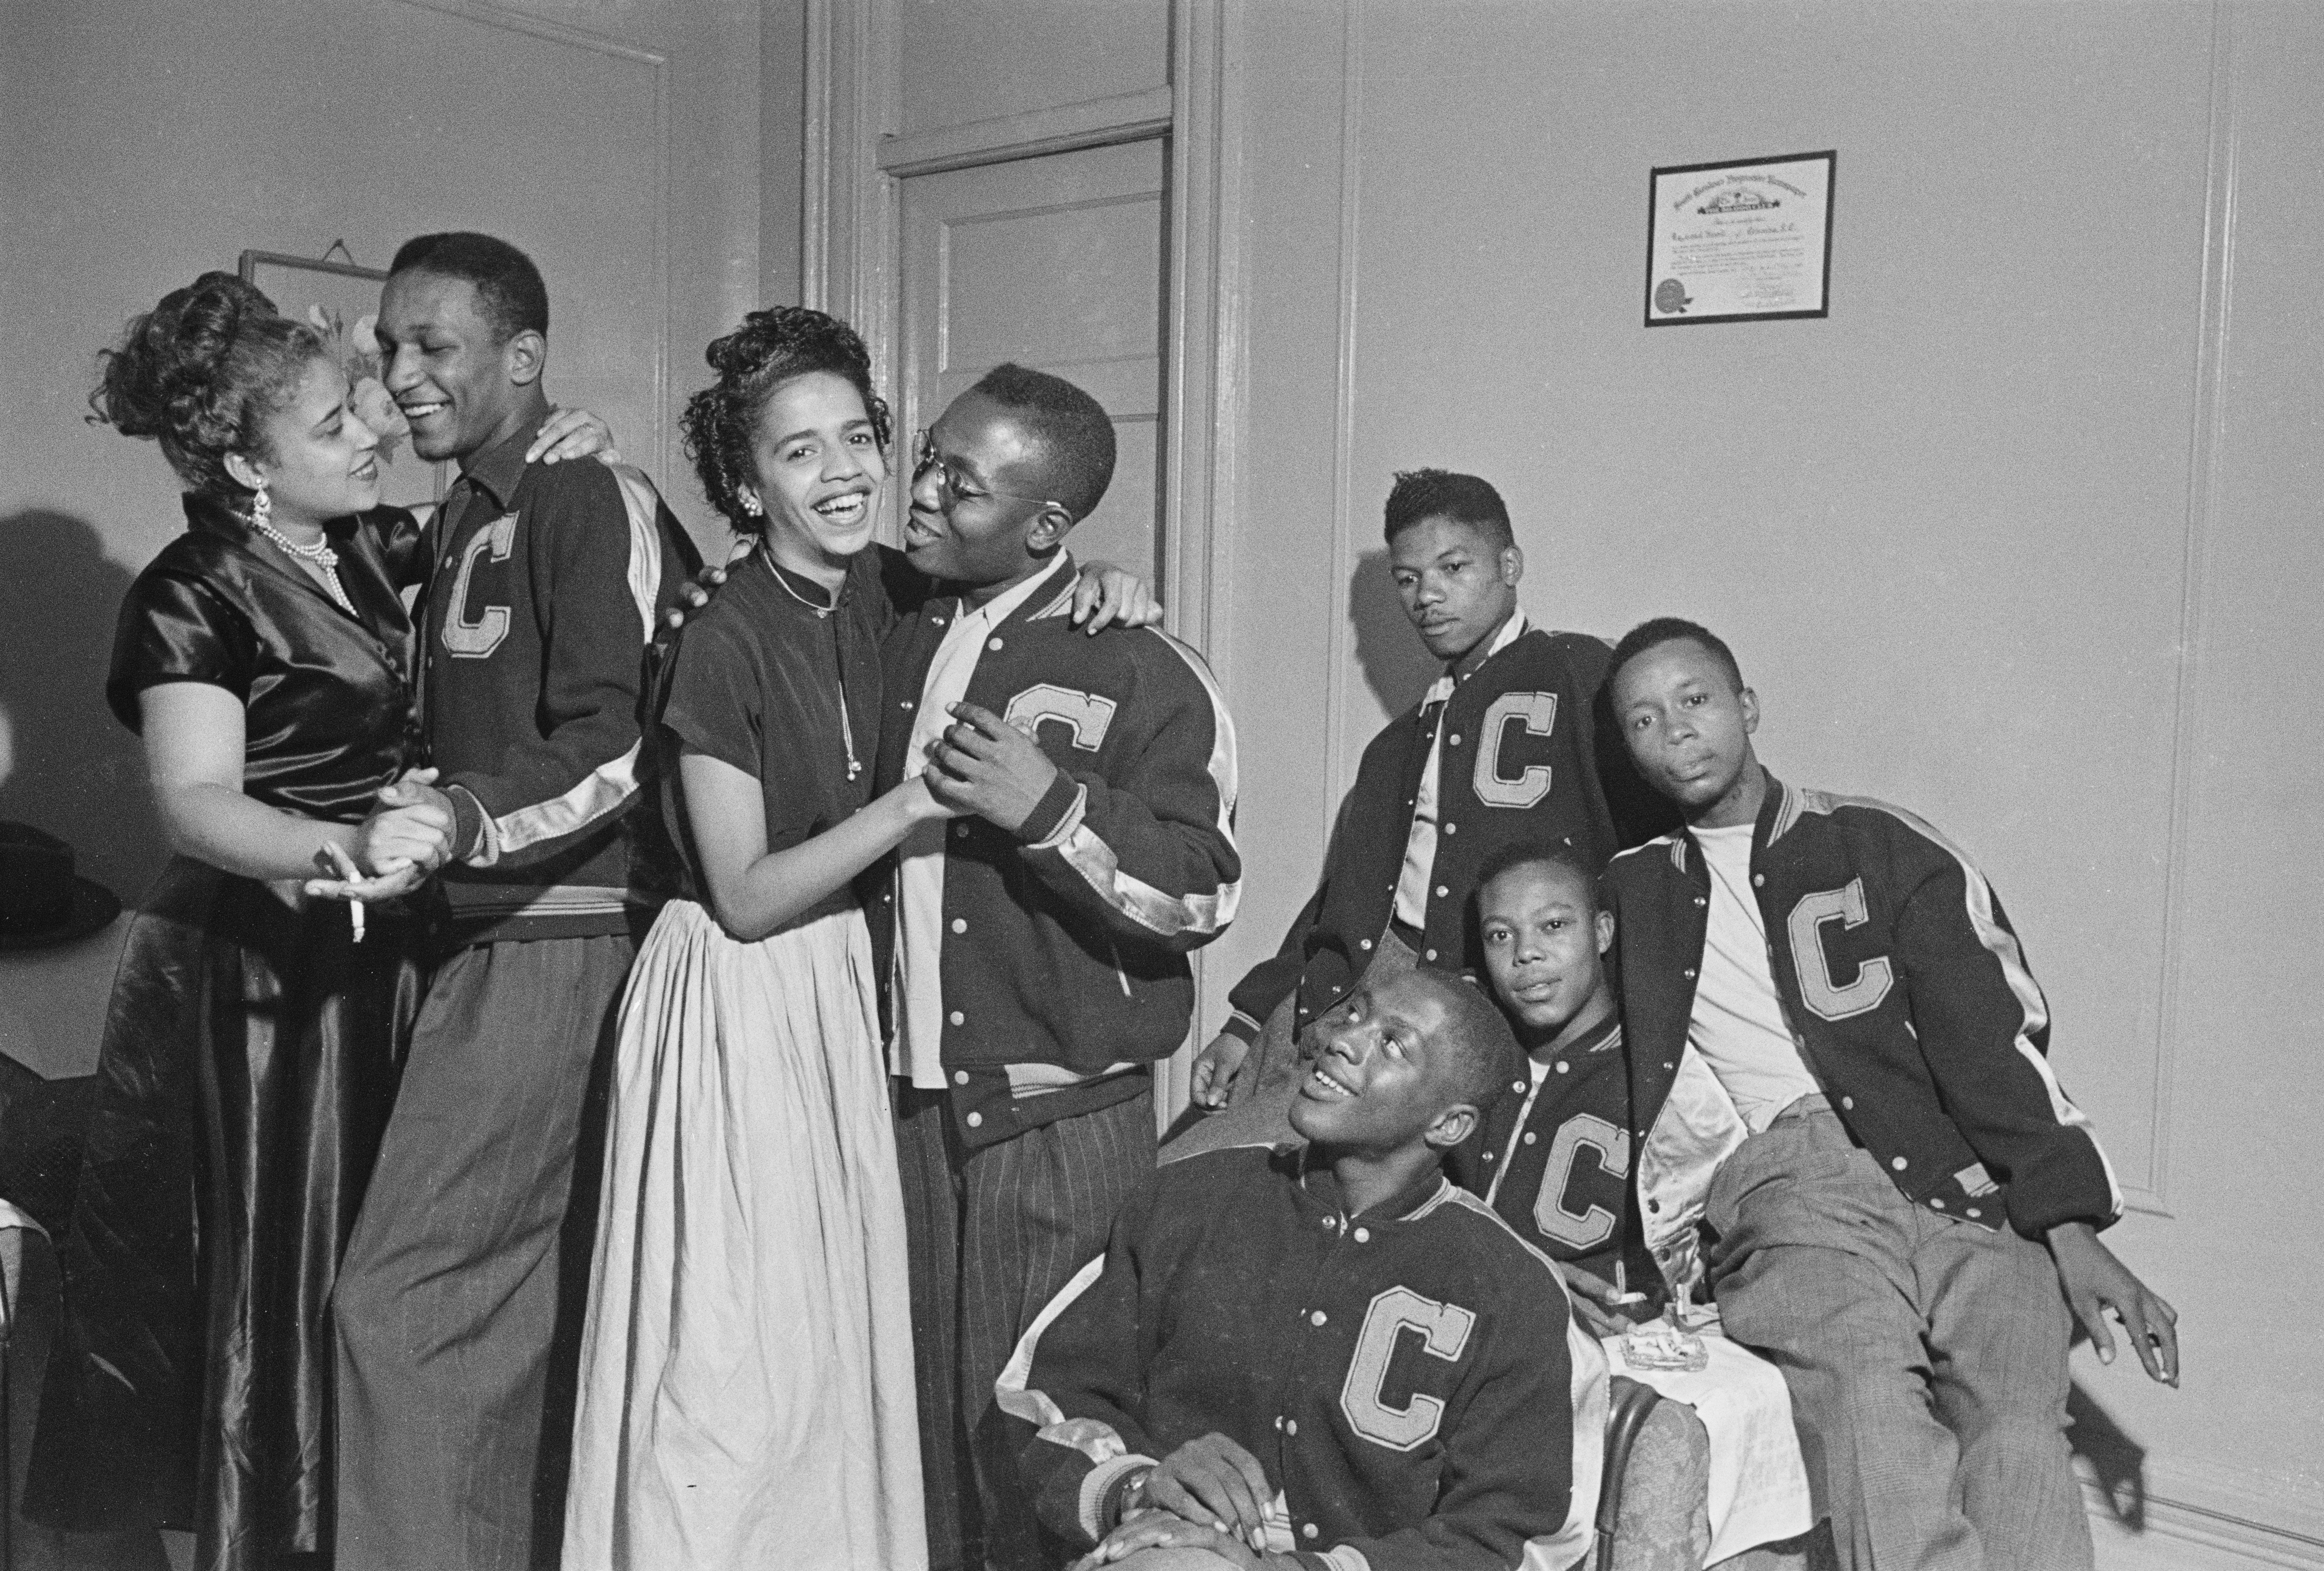 A group of young men and women hang out in a room. Two couples are dancing and smiling. The men are each wearing matching jackets with the letter “C” on the front.